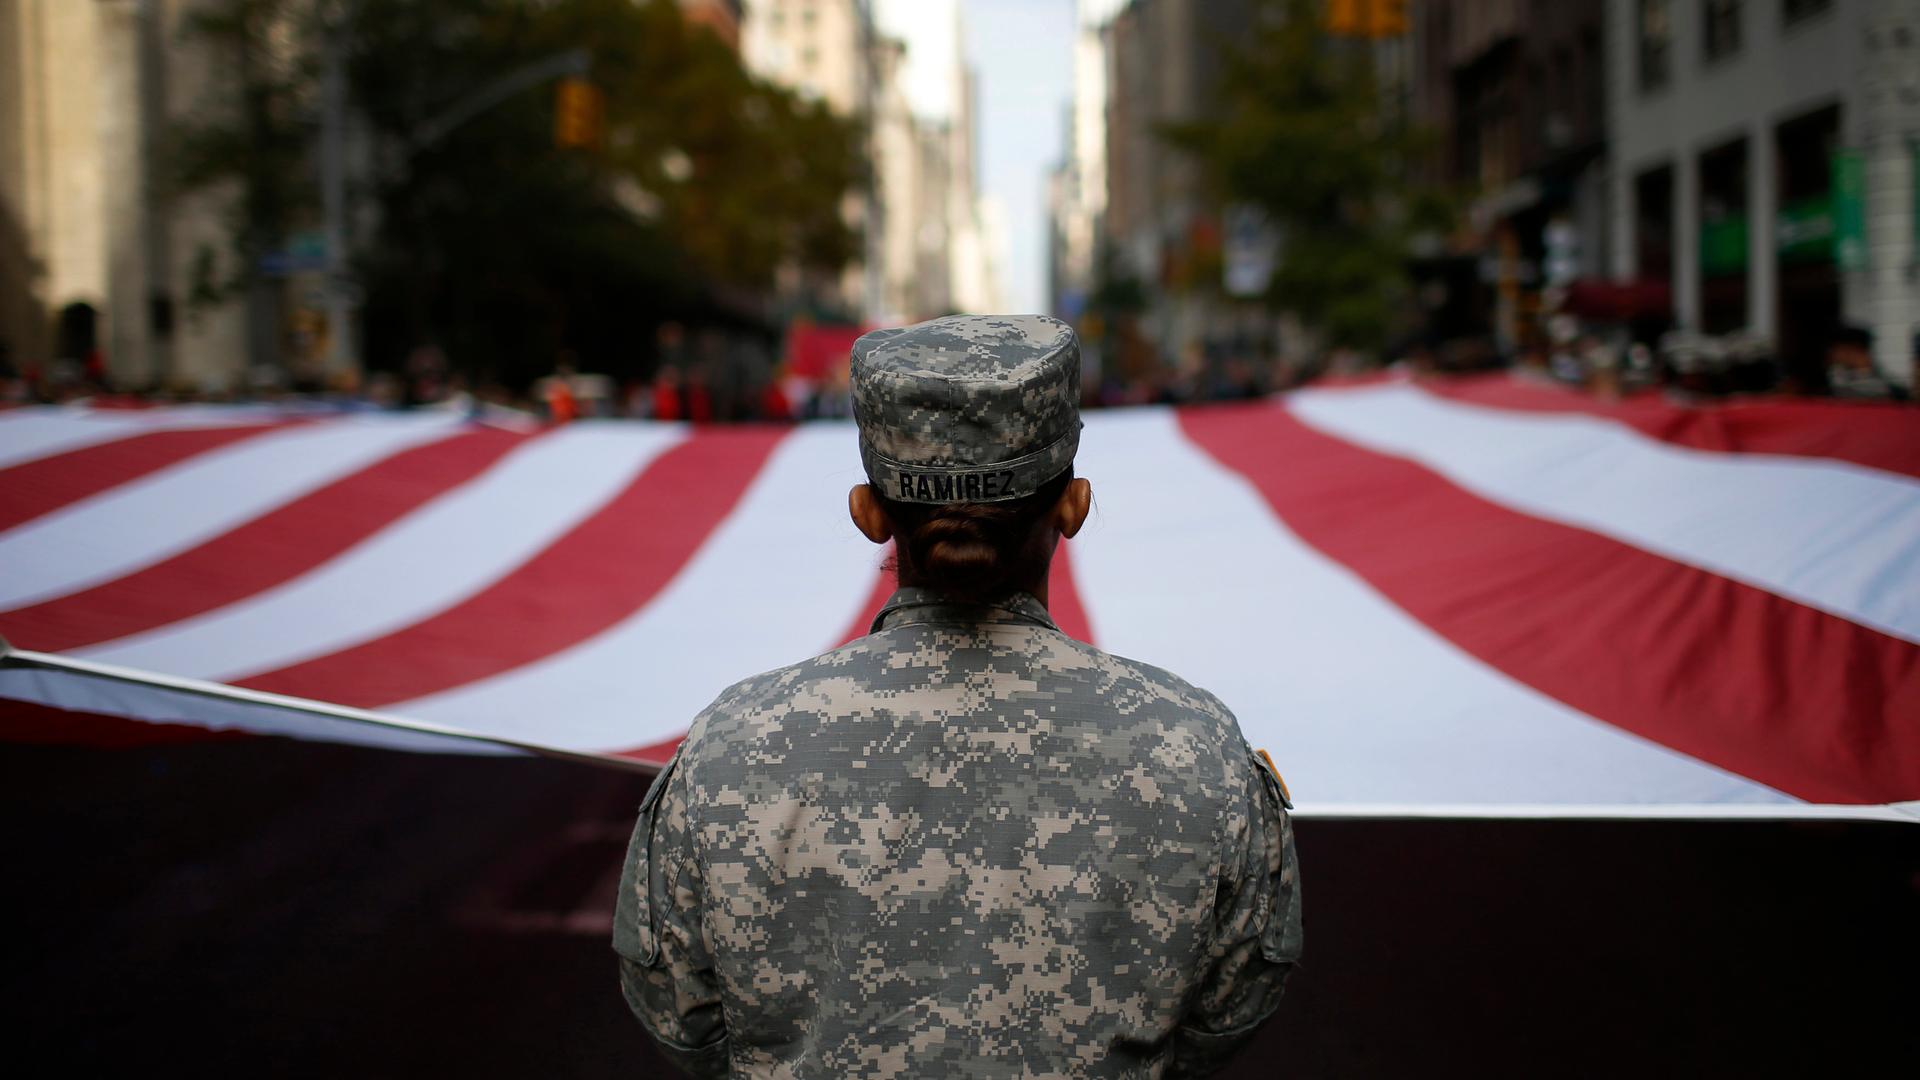 U.S. Army soldiers carry a large U.S. flag as they march in the Veterans Day parade on 5th Avenue in New York November 11, 2014.